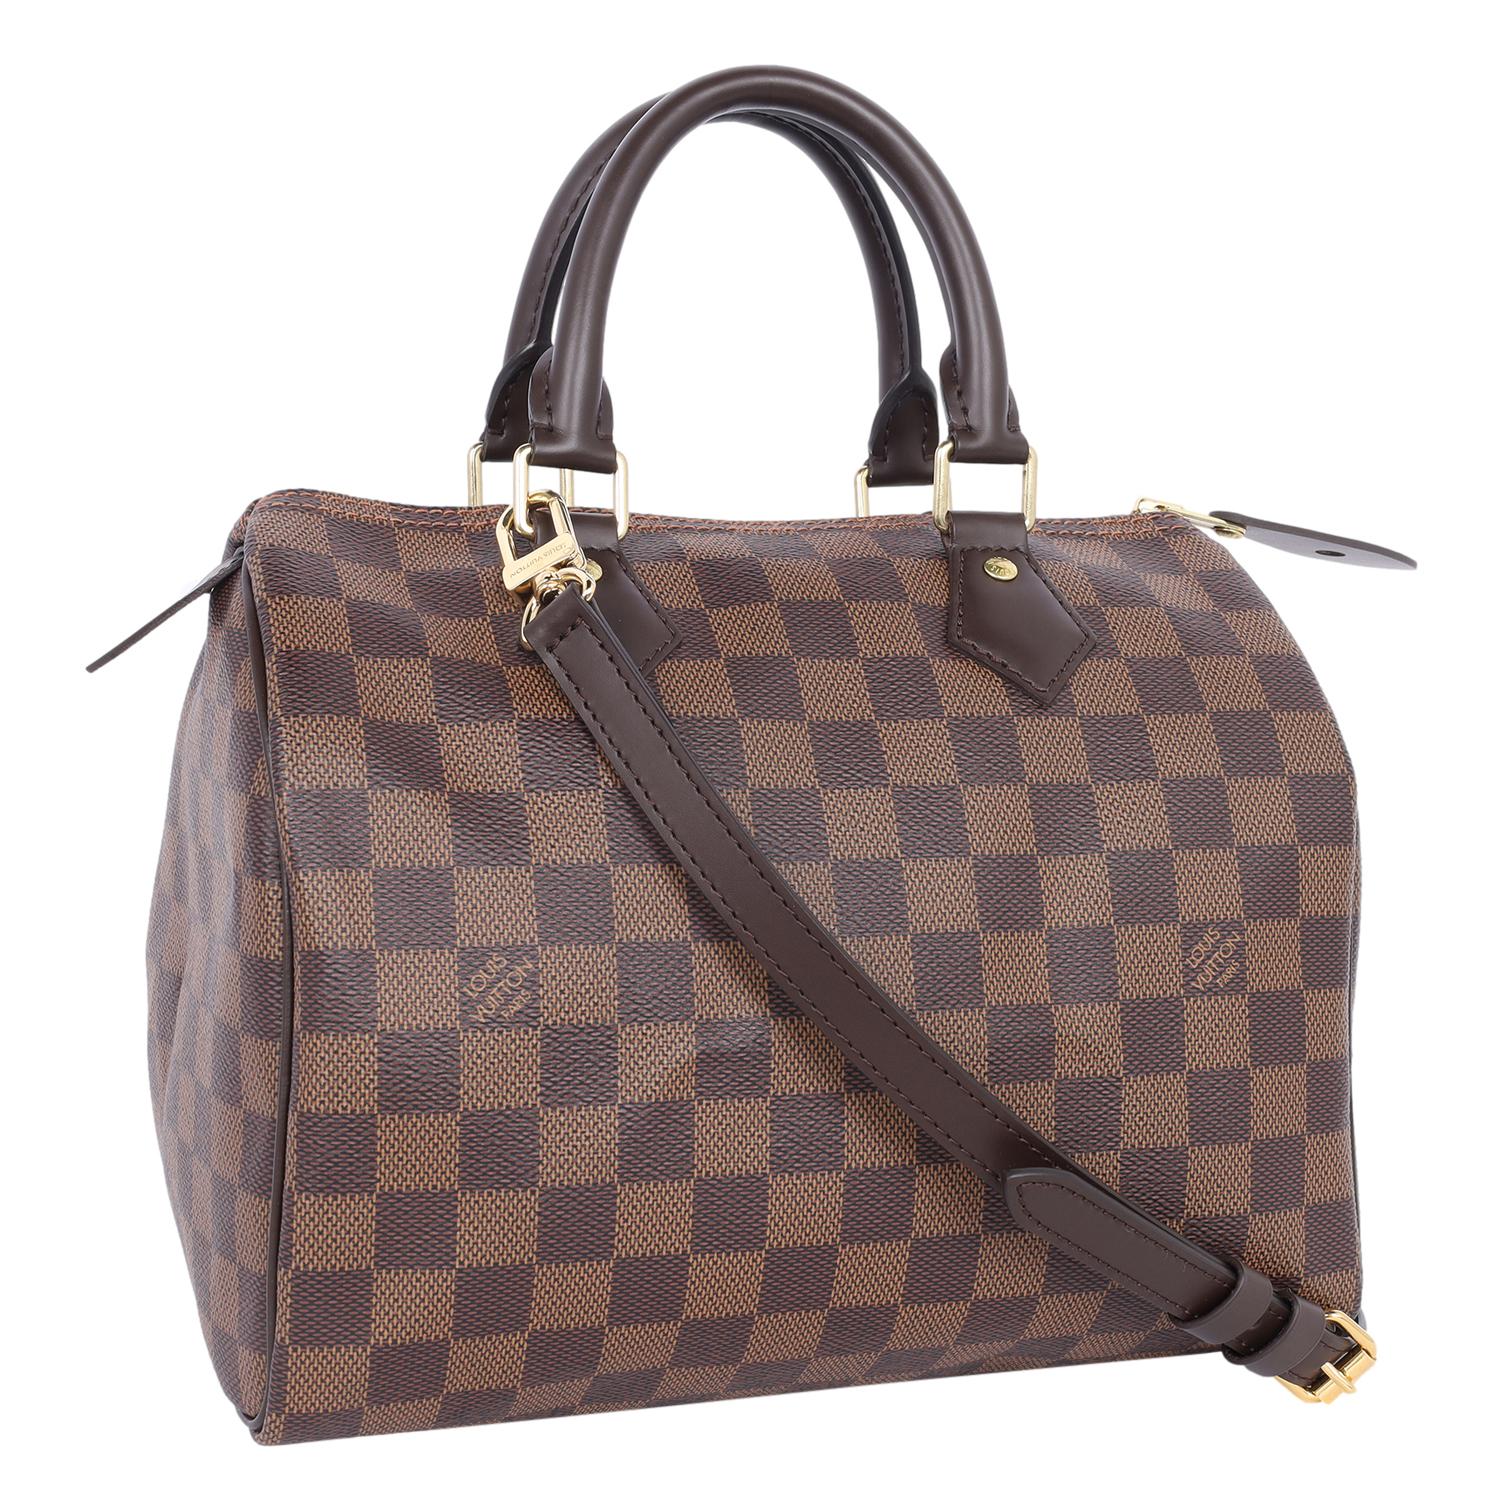 Authentic NEW Louis Vuitton Damier Ebene Speedy 25 with strap. Features Damier Ebene canvas with leather trim, orange textile interior lining with slip pocket, double handles, and zip top closure. Comes with padlock, key and strap. 

Authenticity